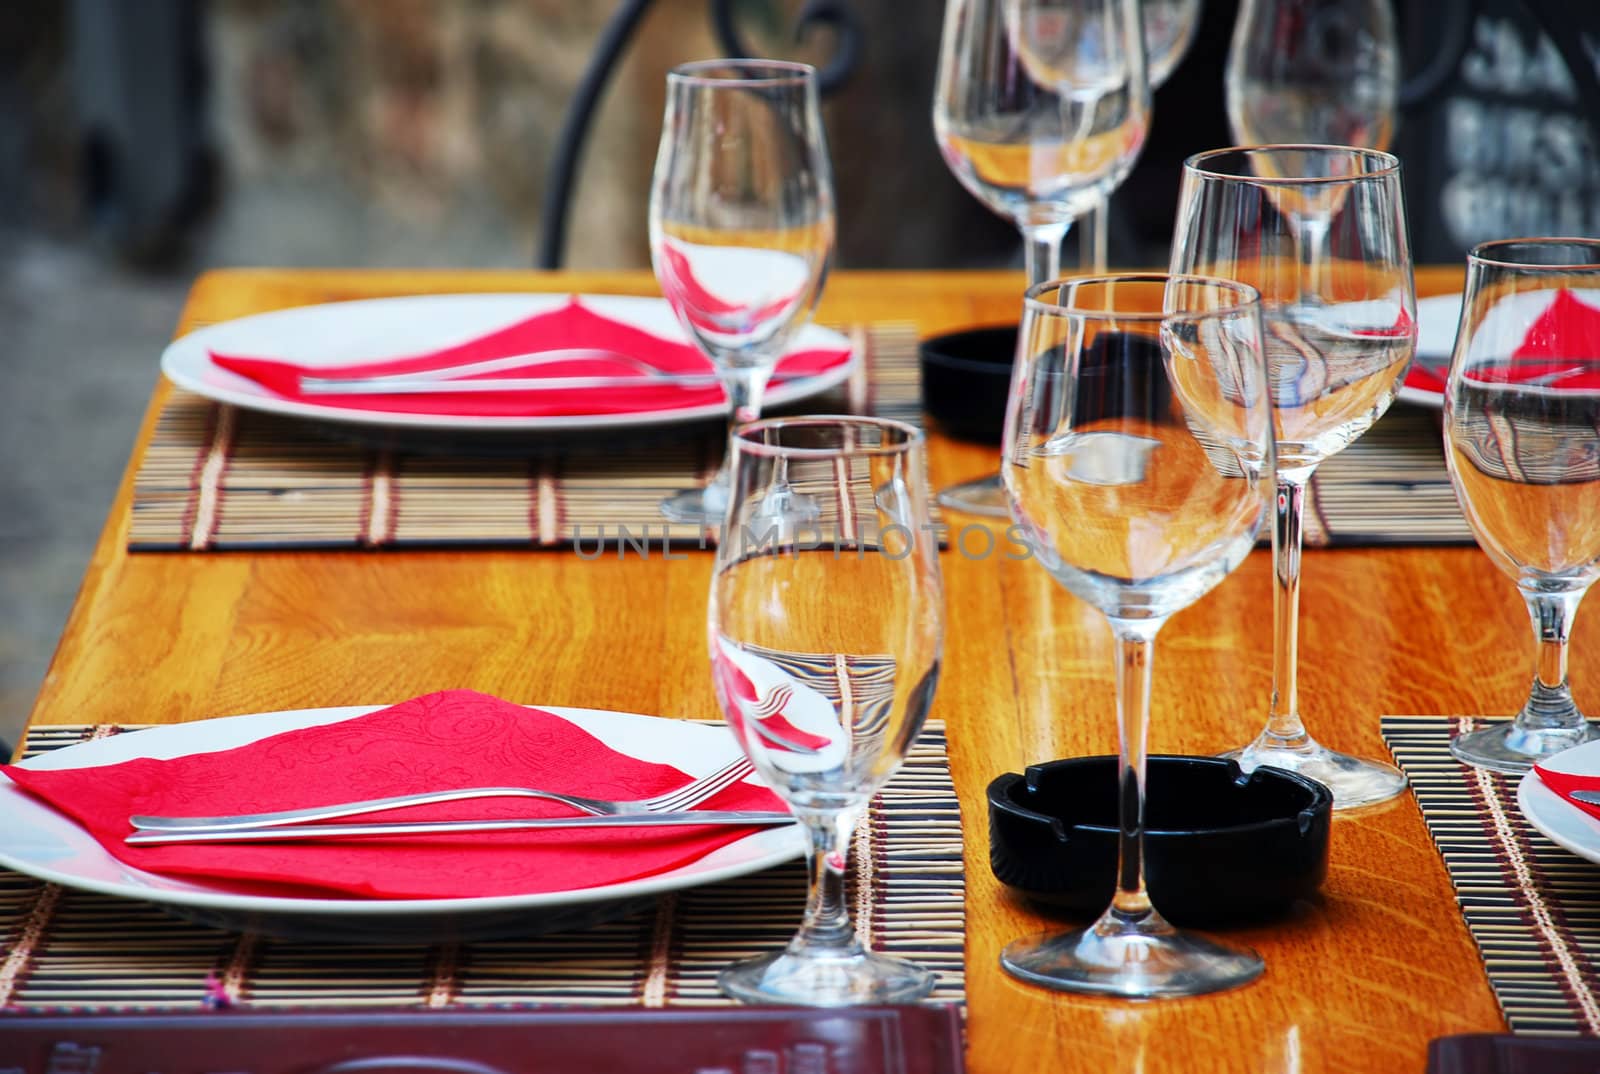 wineglasses and plates on table in restaurant